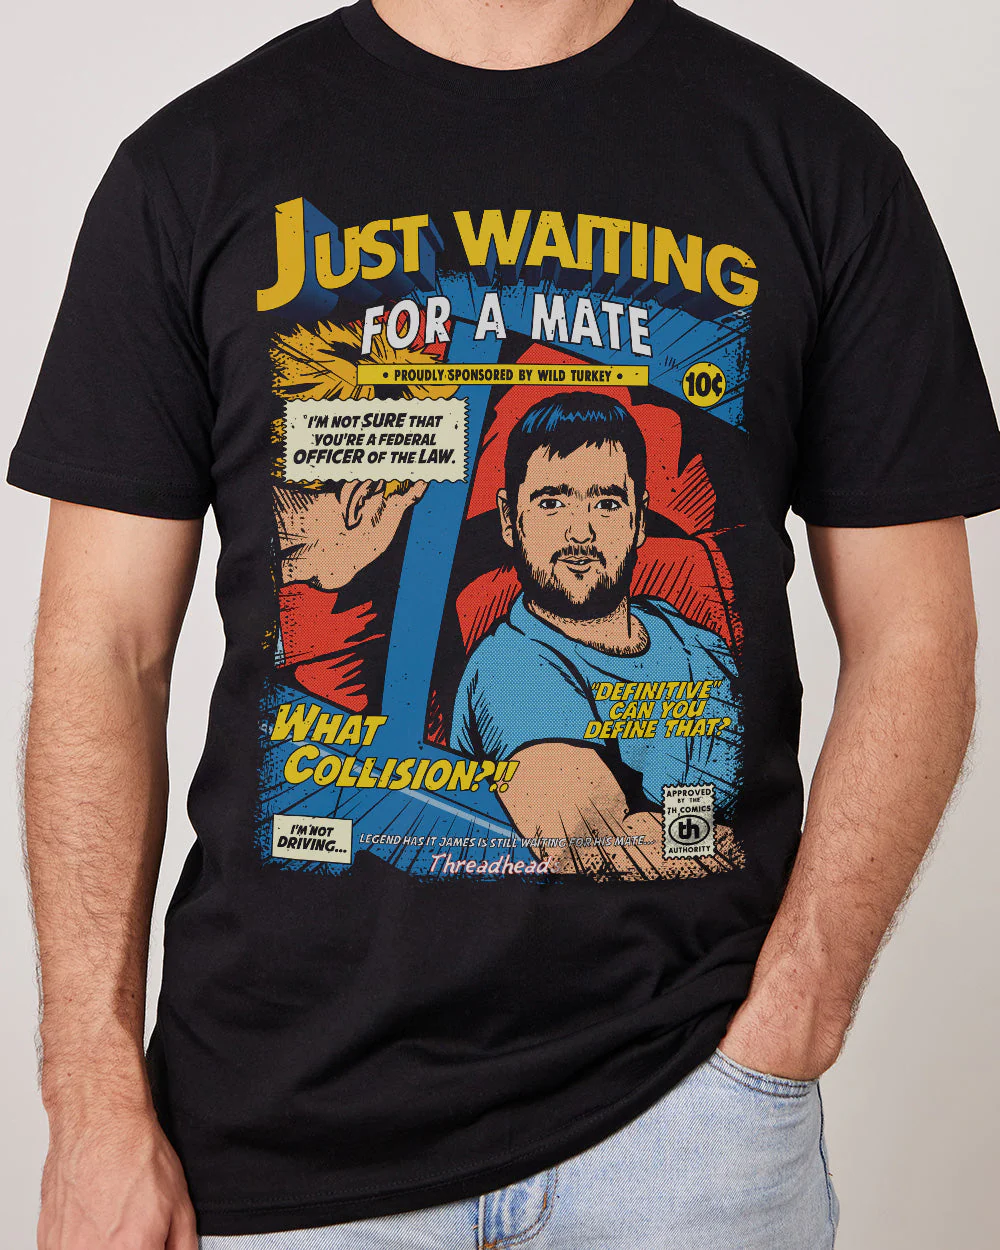 17 Best Custom T-Shirt Companies To Use In 2024